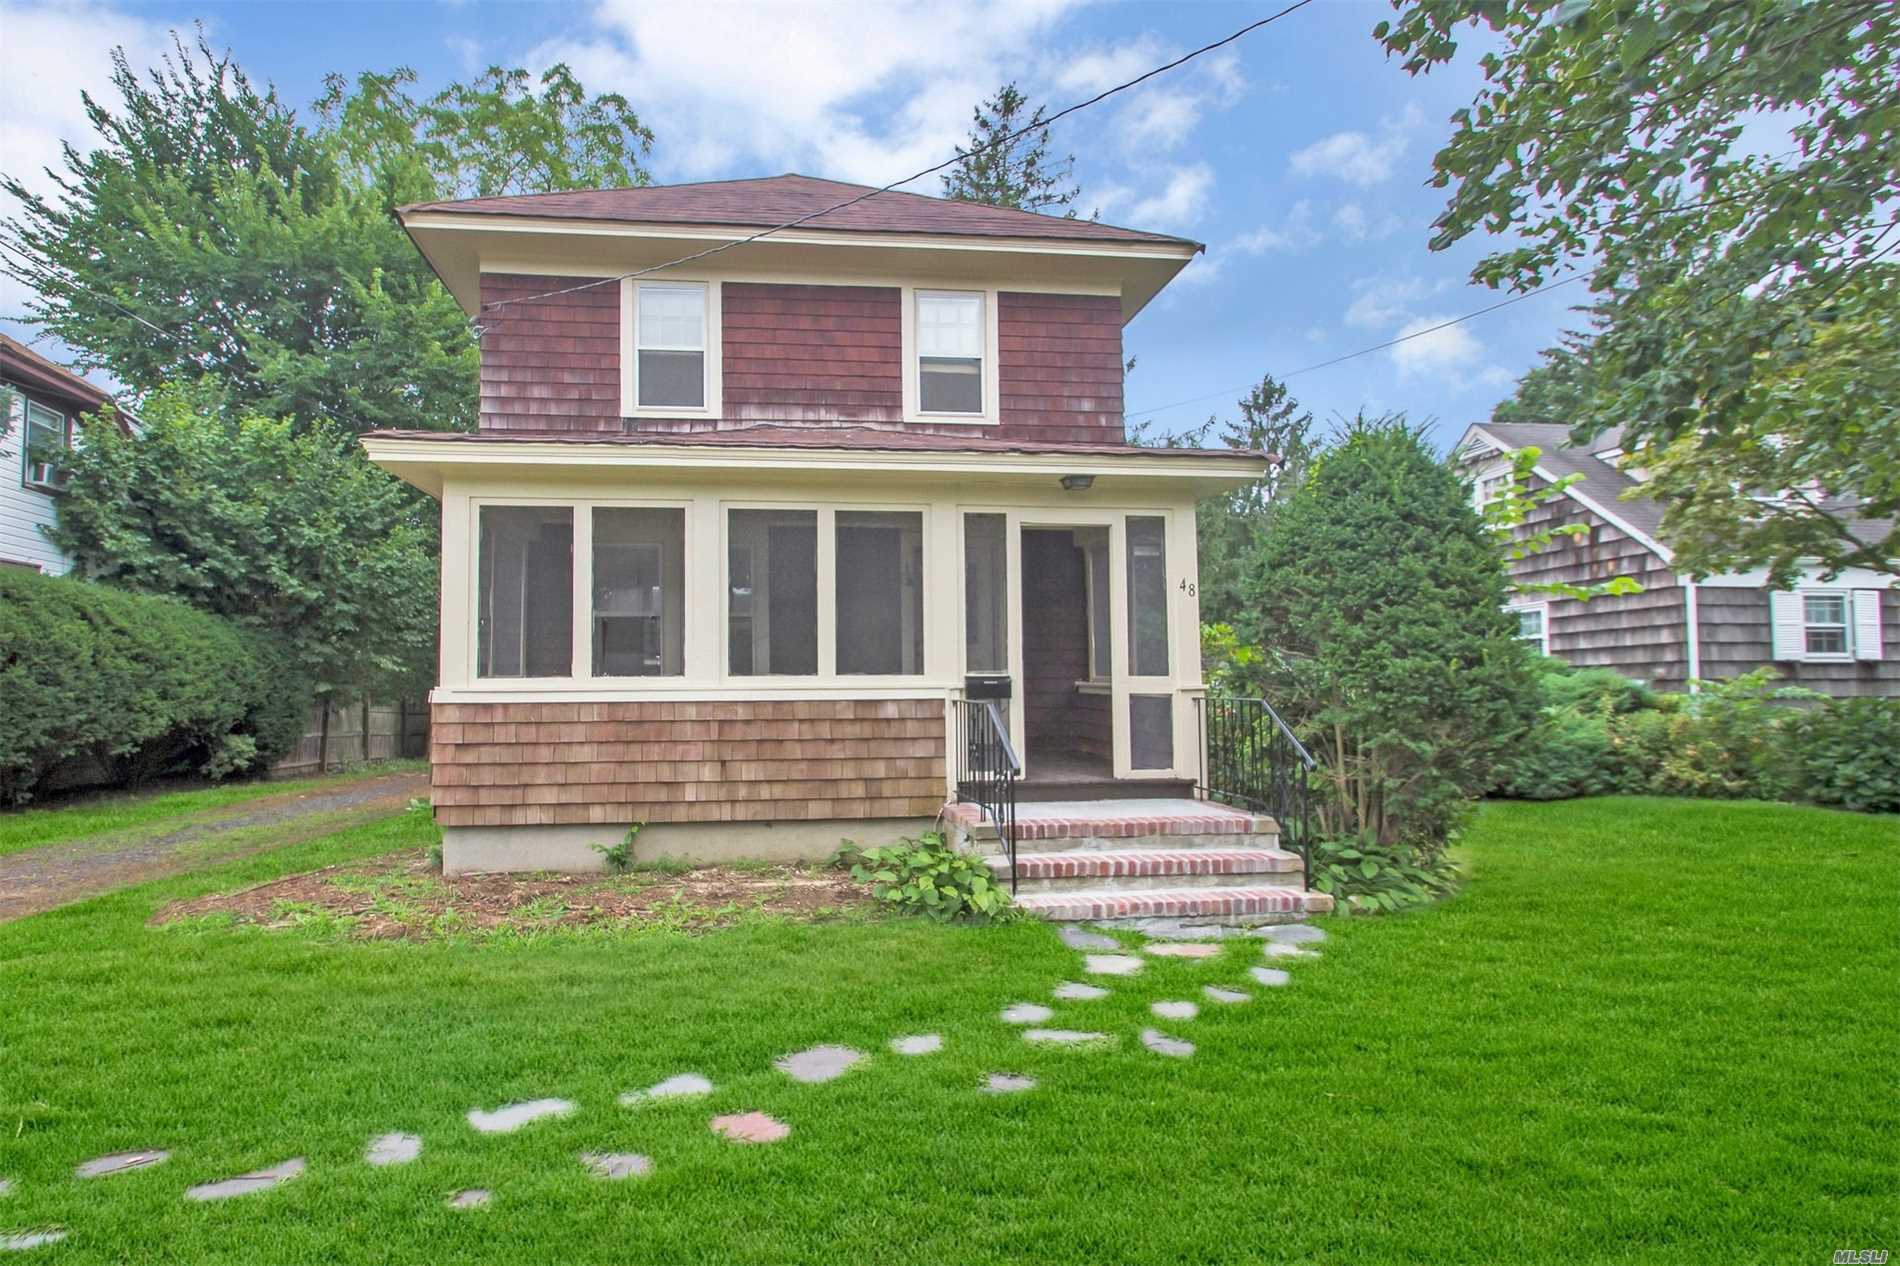 3 Bedroom Colonial In Very Desirable Presidential Section Of Babylon Village.48 Lincoln St Boasts Enclosed Front Porch, Hardwood Floors, Door Mouldings, Cast Iron Radiators, House Equipped With Natural Gas, Large Bedrooms, Great Yard Space. Full Basement, Large 1.5 Car Garage, And Large Granny Attic